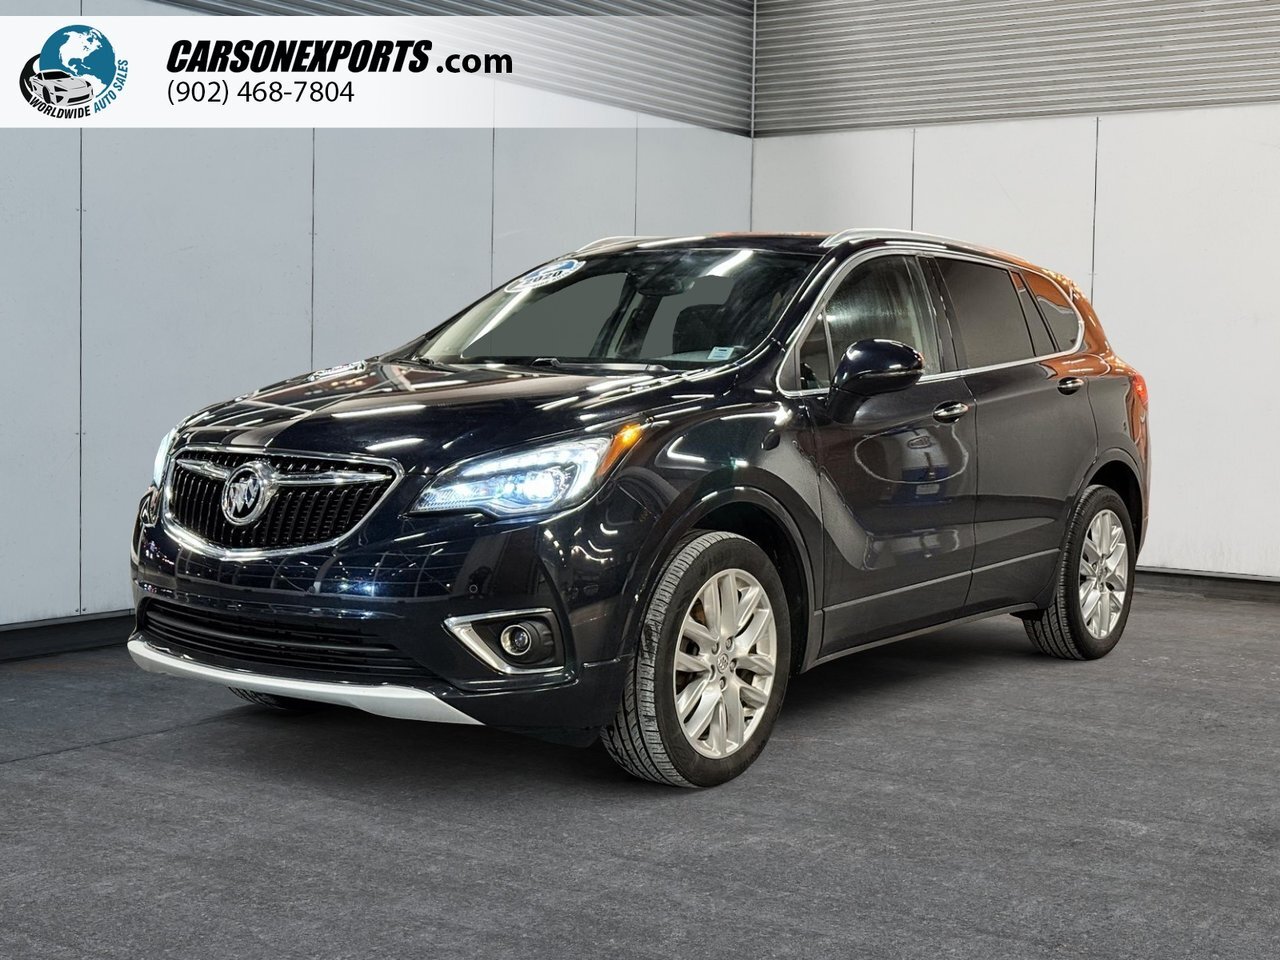 2020 Buick Envision Premium I The best place to buy a used car. Period